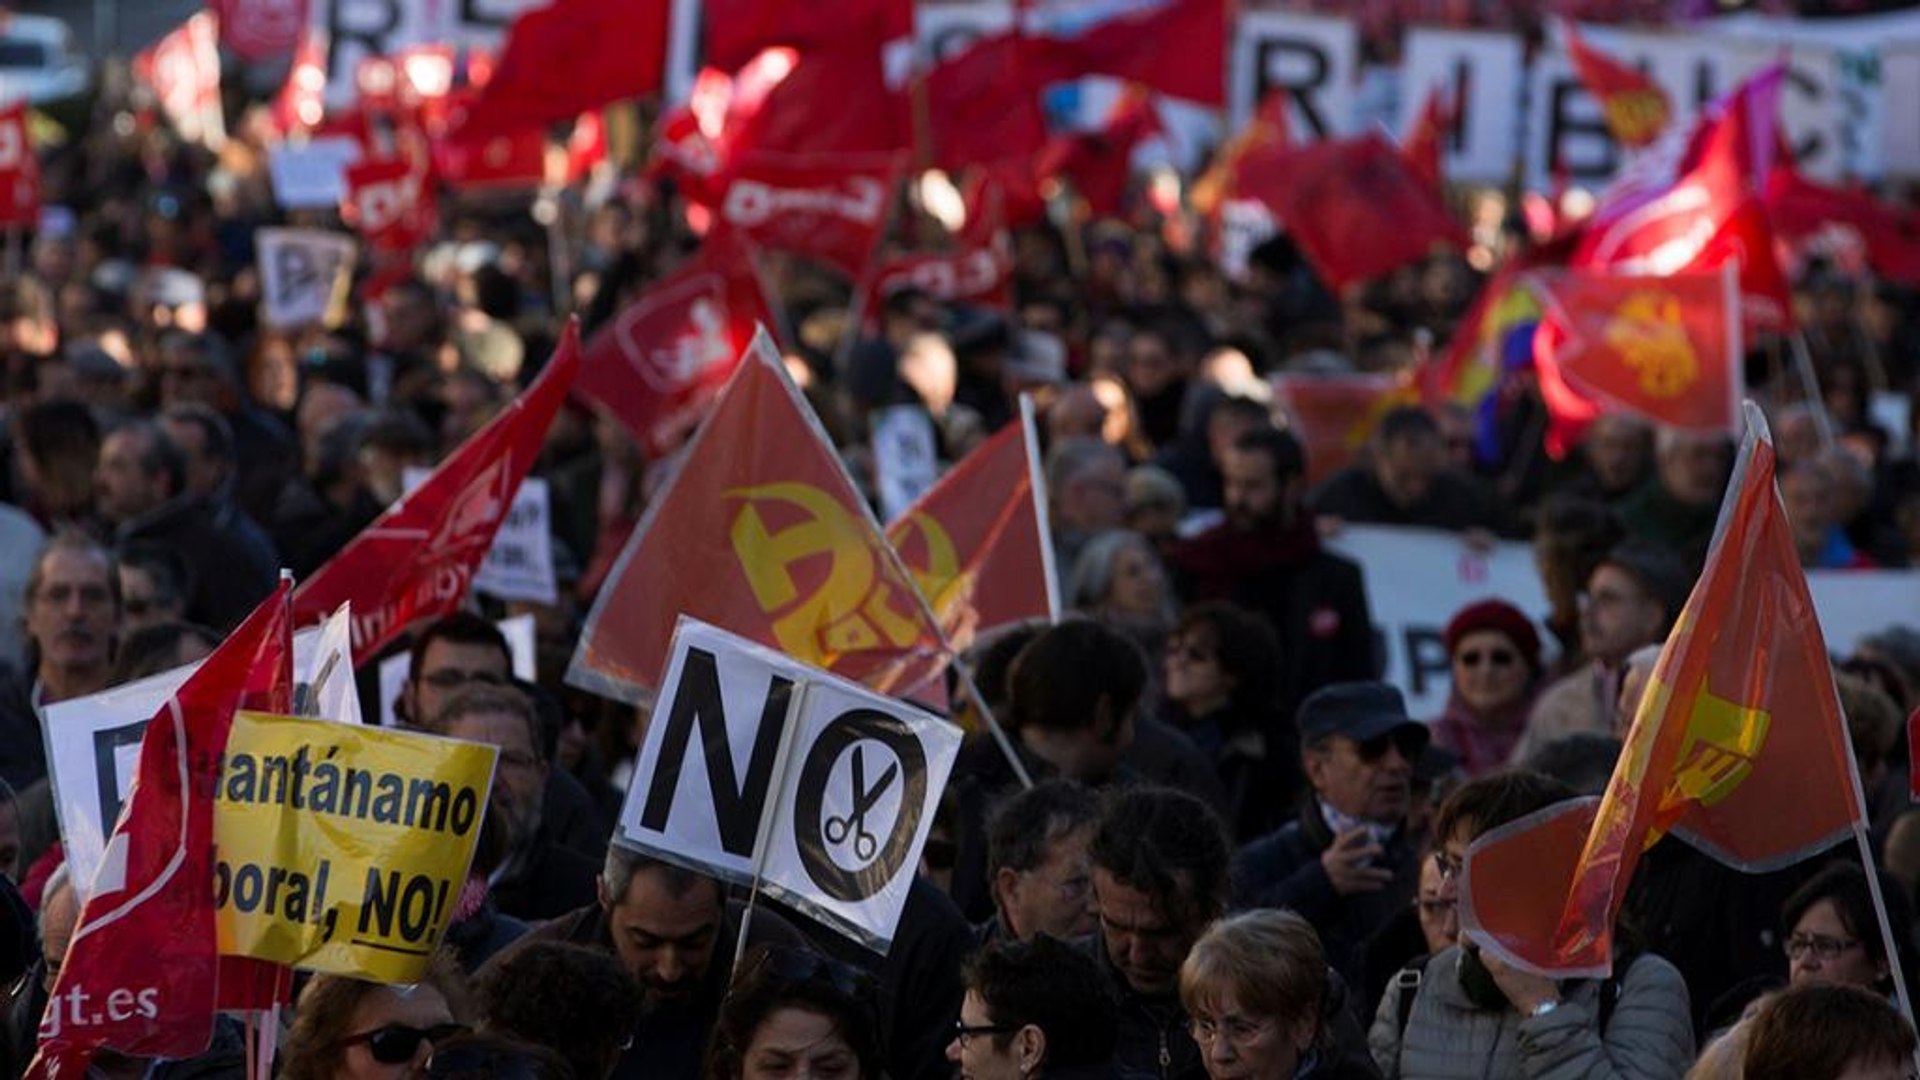 Spain: Anti-austerity protest attracts thousands - video Dailymotion